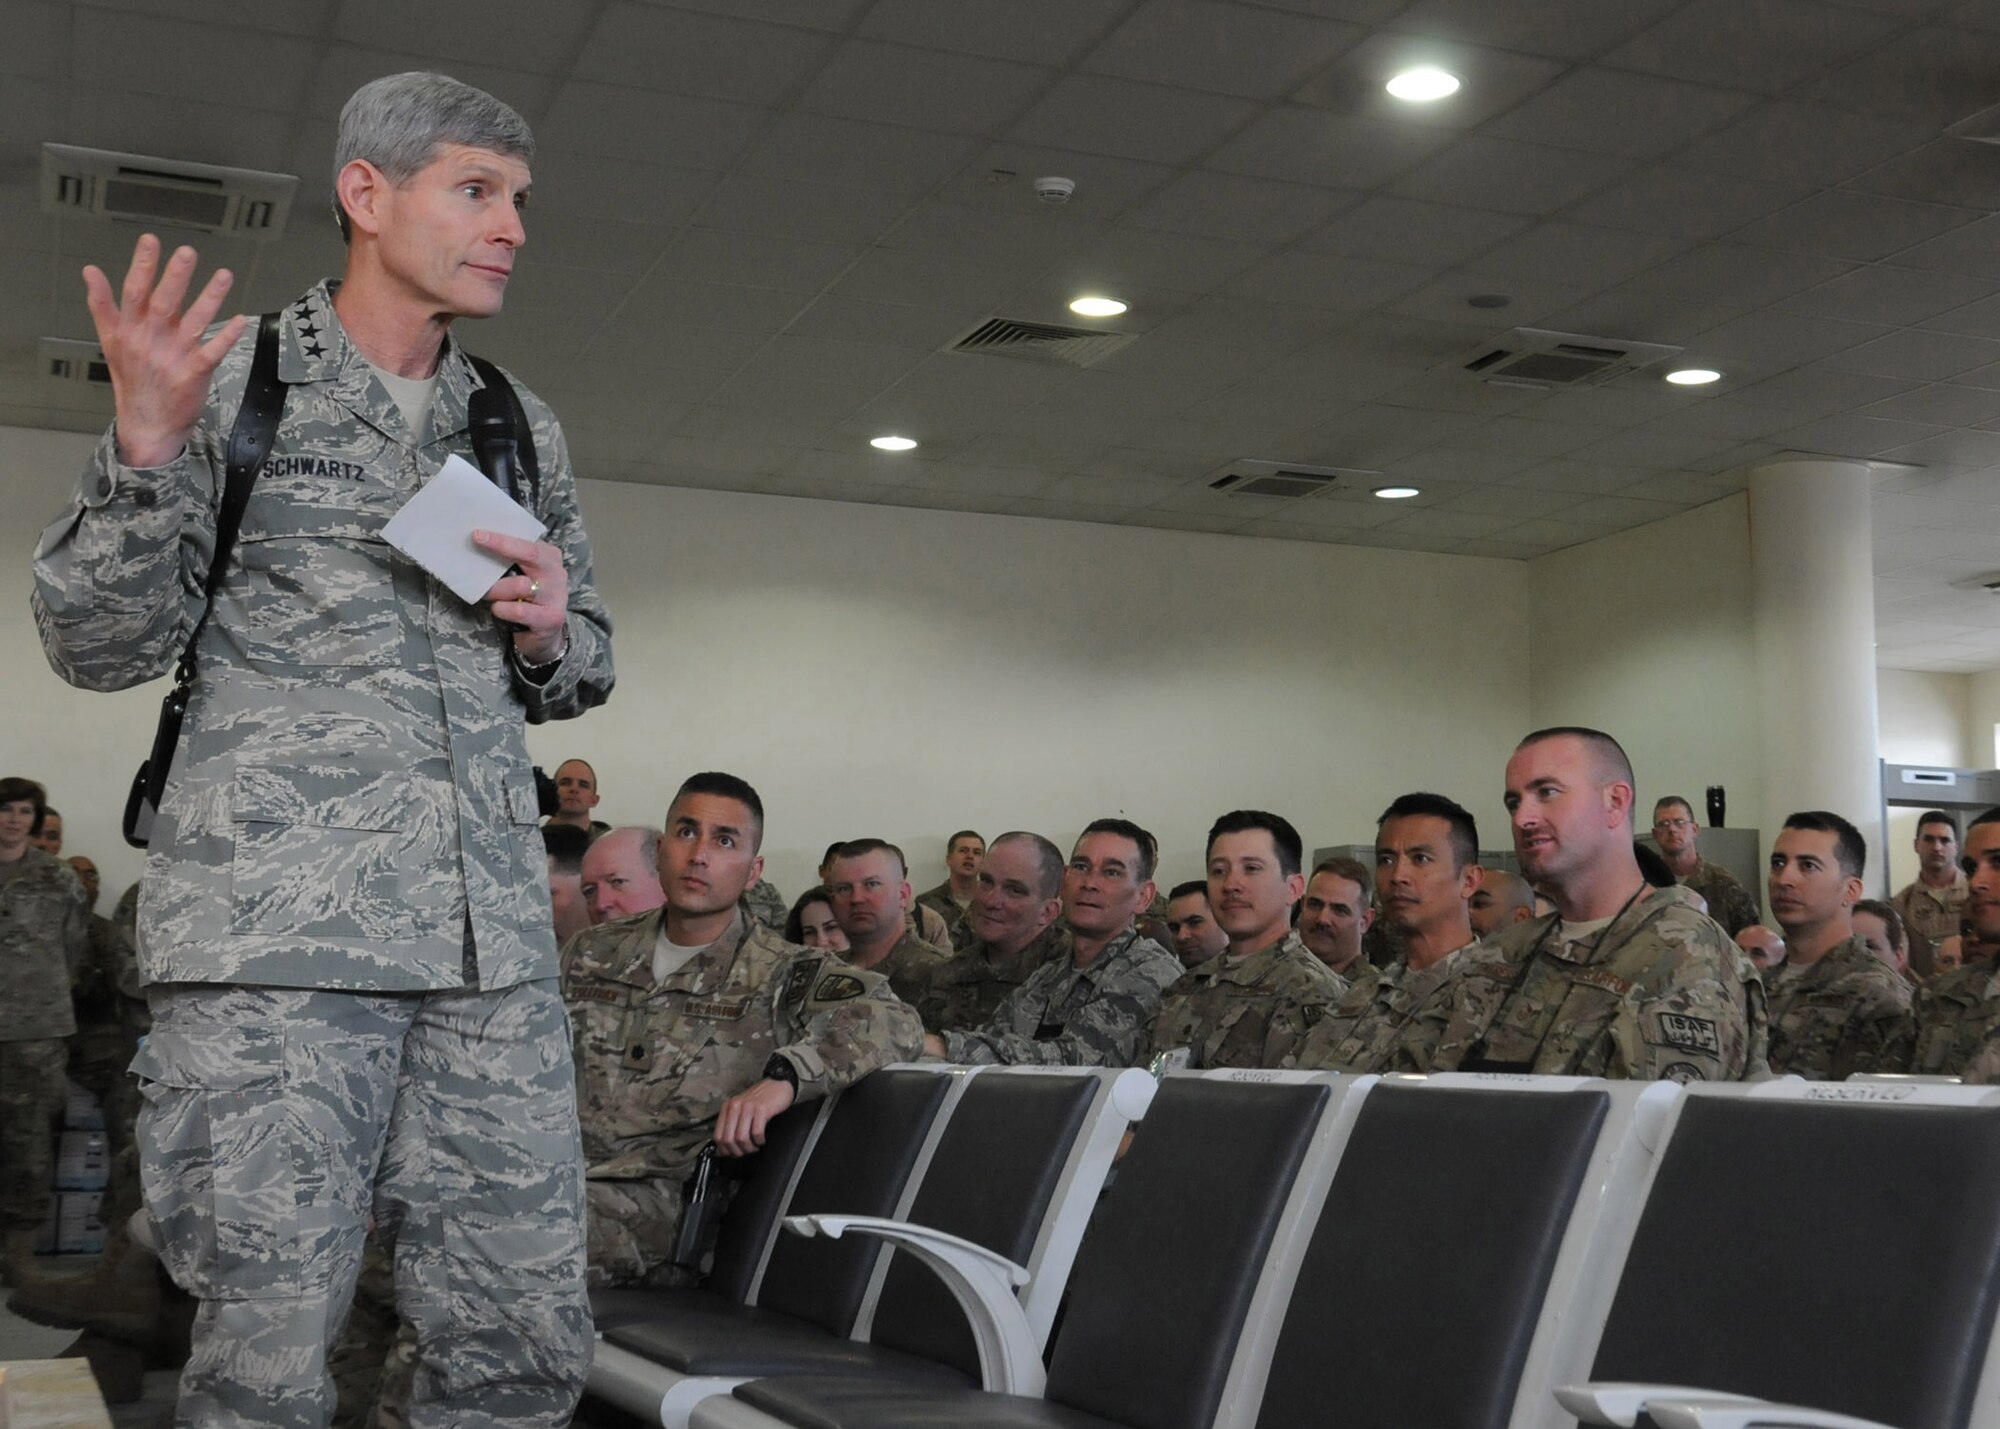 Air Force Chief of Staff Gen. Norton Schwartz talks with Airmen from the 438th Air Expeditionary Wing and the International Security Assistance Force Joint Command April 23, 2012, during his visit to Kabul International Airport, Afghanistan. The general discussed resiliency issues effecting today?s Airmen and their families, changes in service capabilities, and Air Force budget priorities. (U.S. Air Force photo/Staff Sgt. Nadine Y. Barclay)